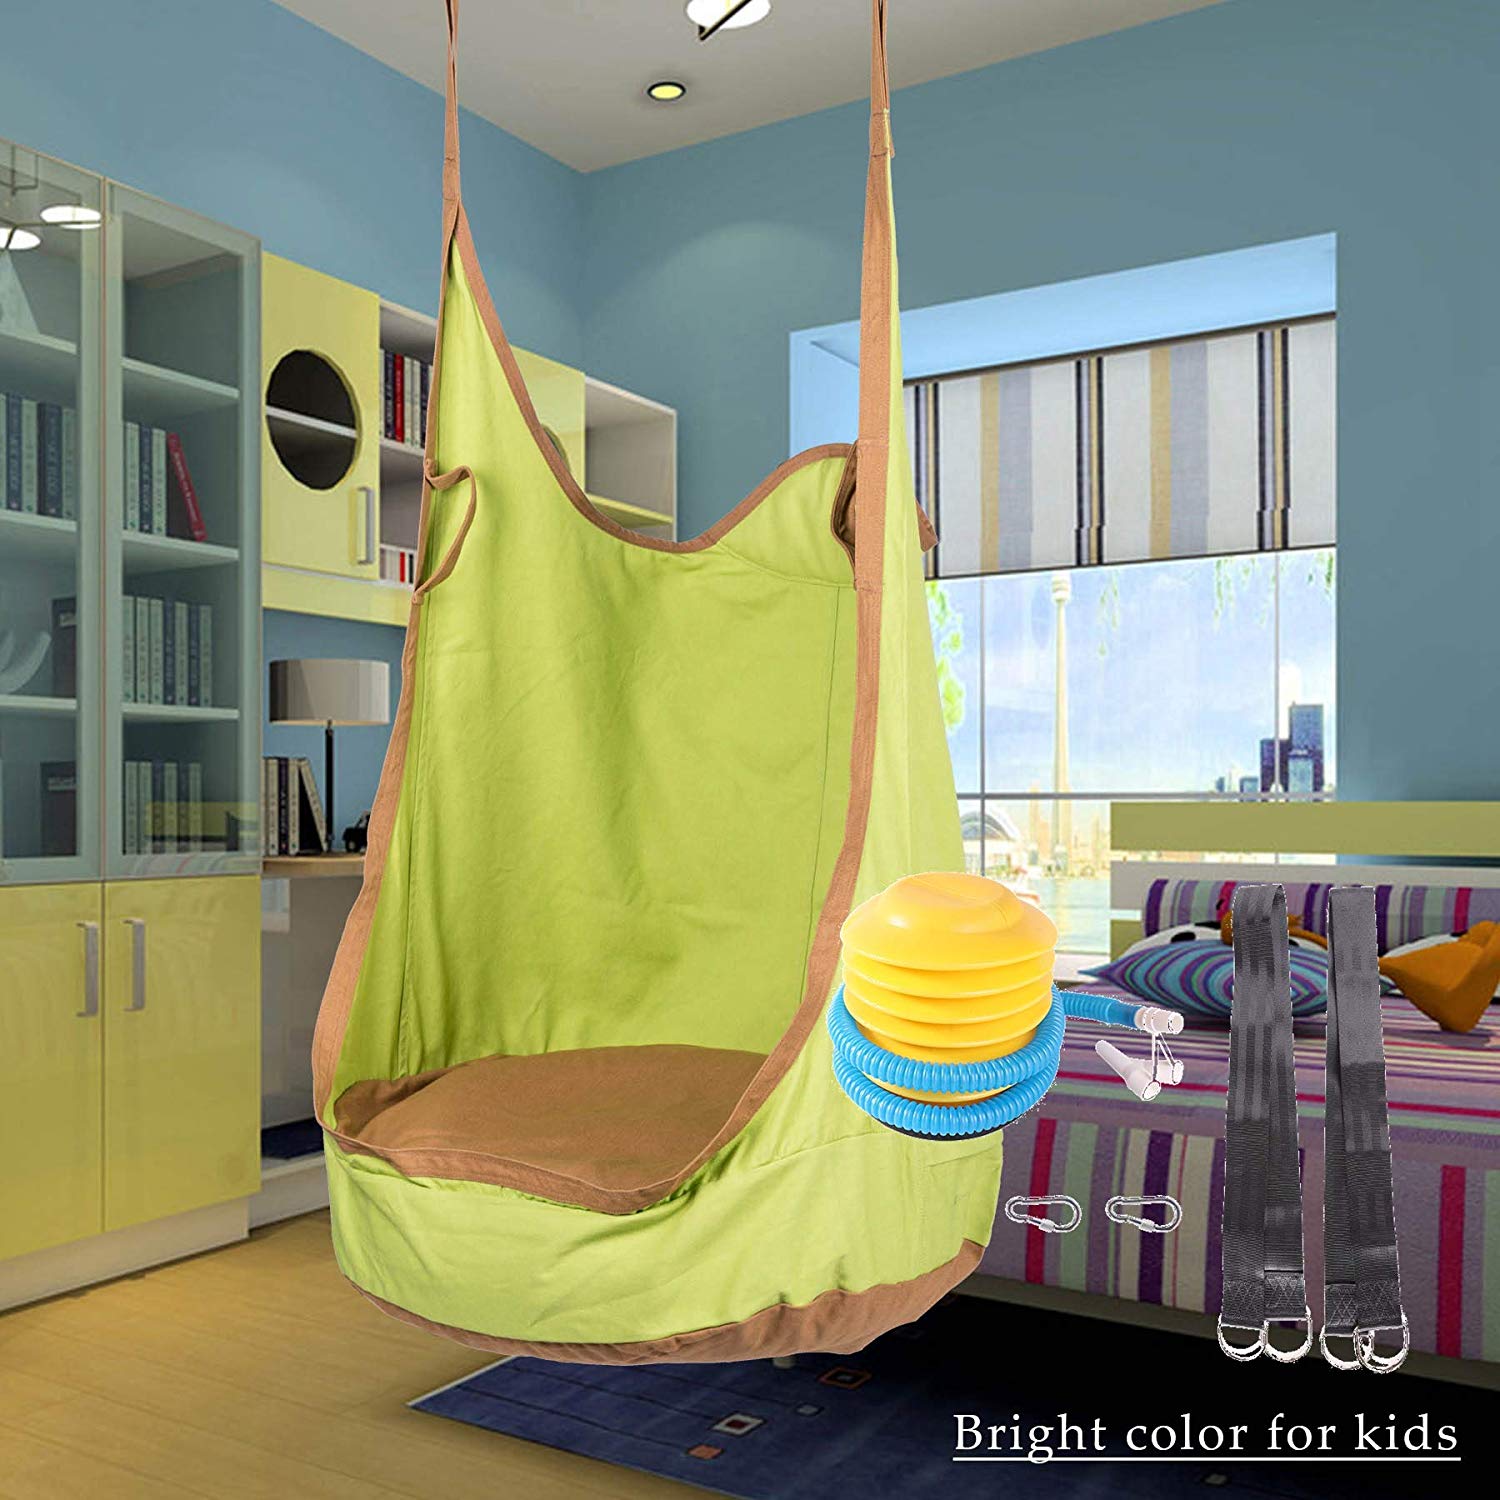 Review of CO-Z Kids Pod Swing Seat Child Hanging Hammock Chair